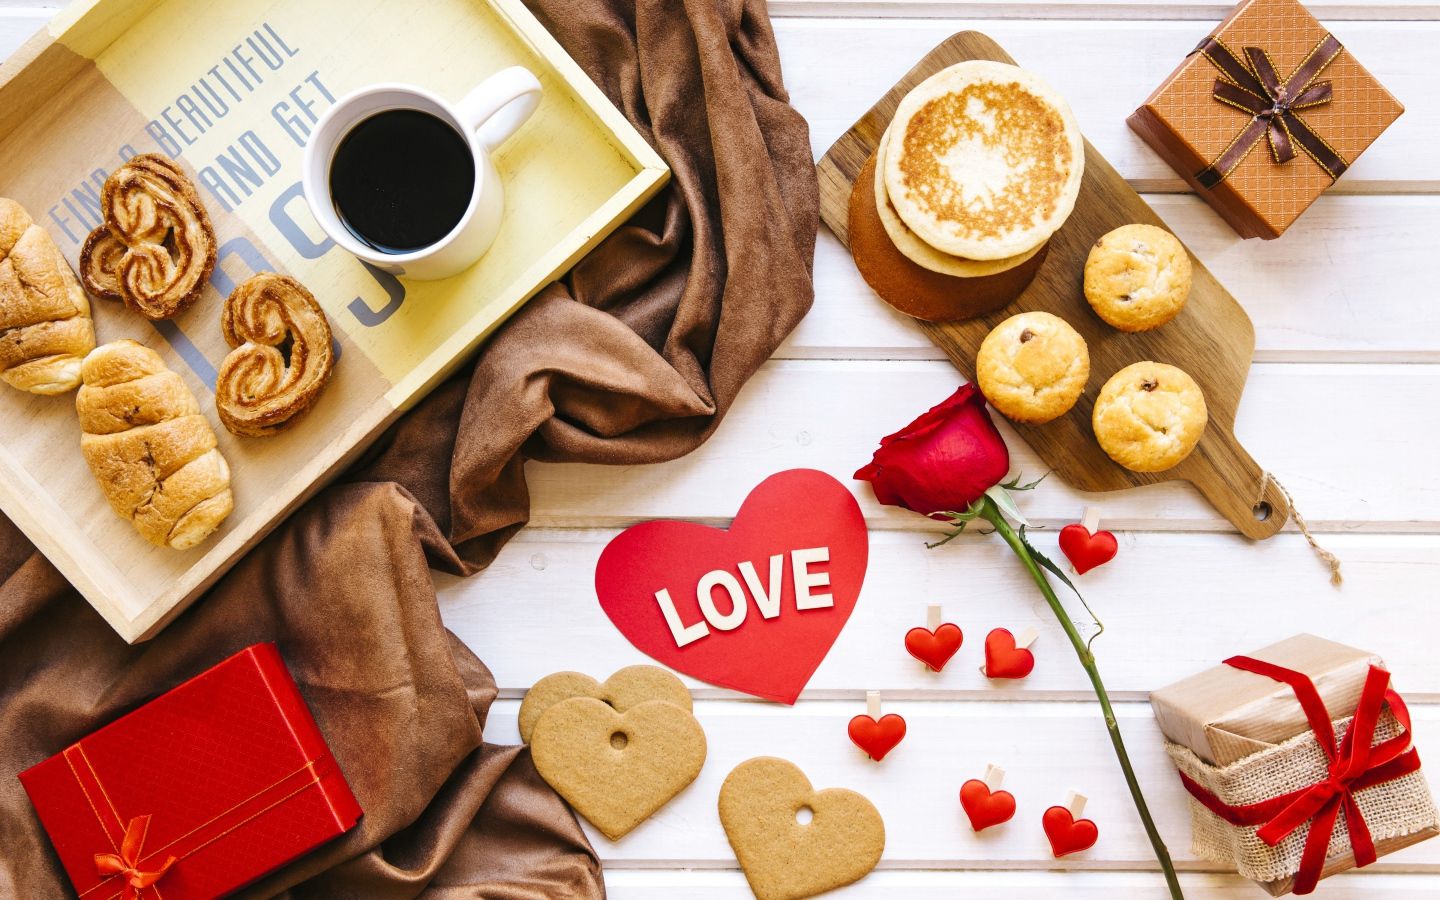 Cookies, coffee and gifts for your beloved on Valentine's Day Desktop wallpaper 1440x900